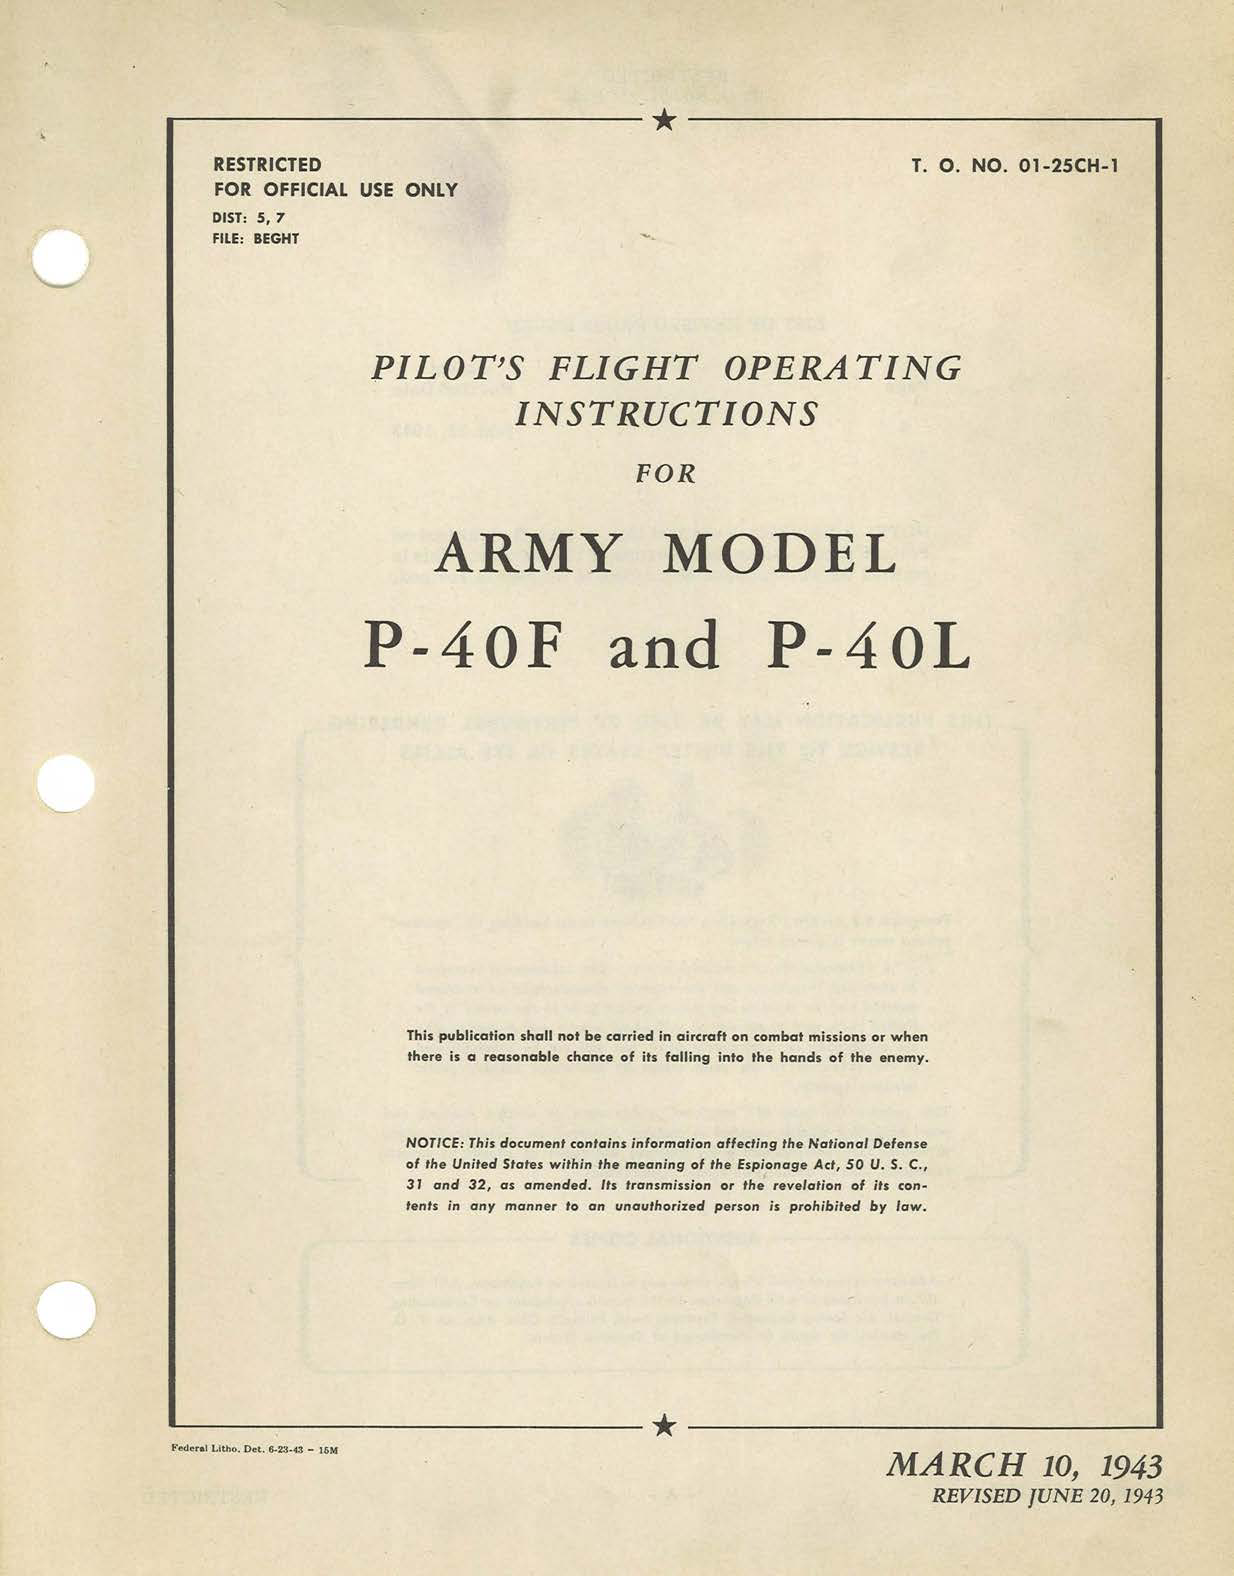 Sample page 1 from AirCorps Library document: Pilot's Flight Operating Instructions for P-40F and P-40L